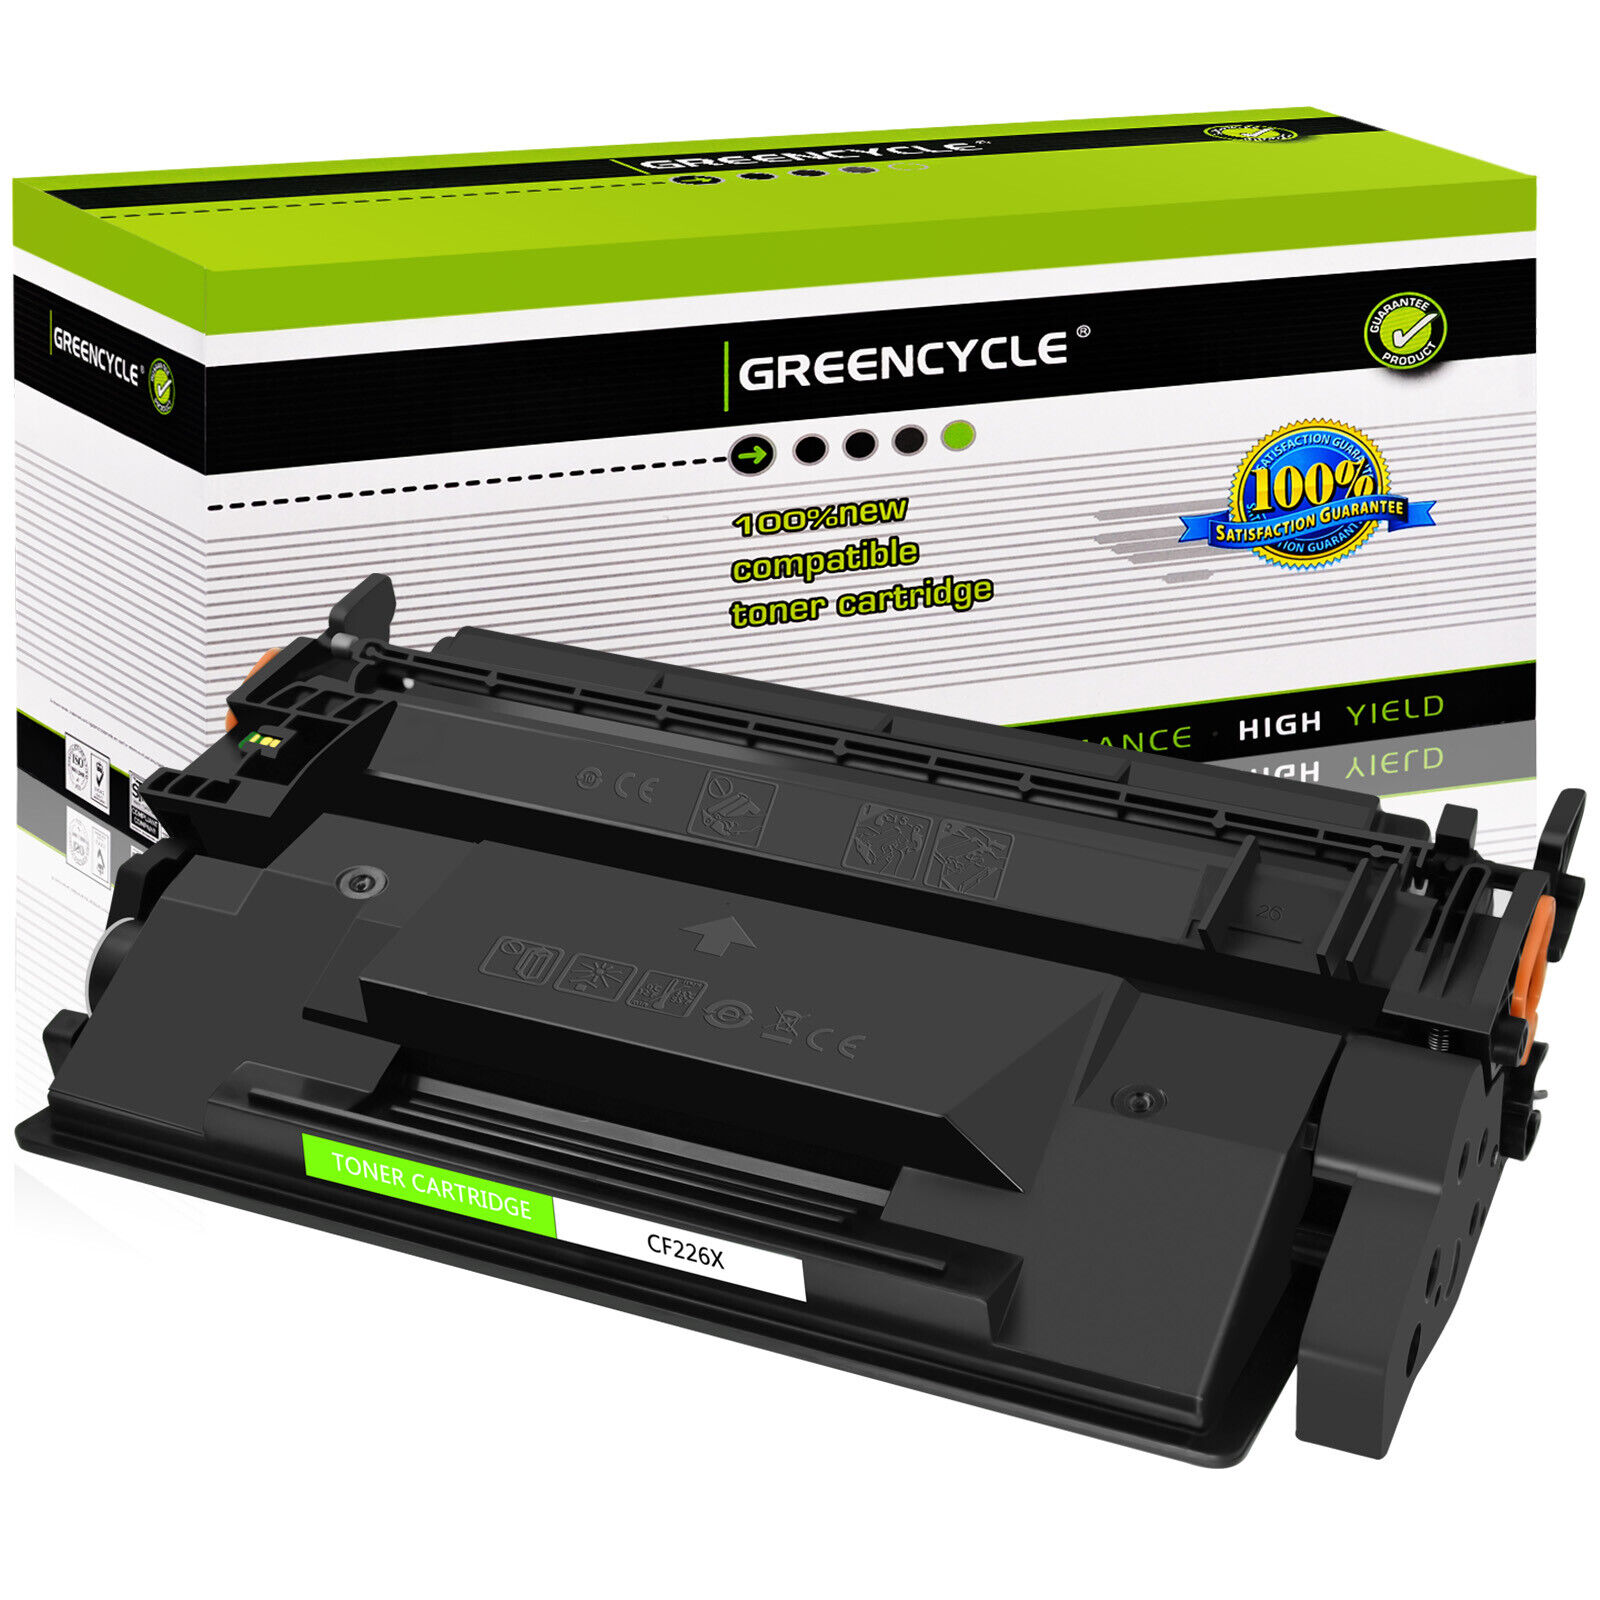 GREENCYCLE 26X CF226X Toner Lot Compatible with HP M402d M402dw M402n MFP M426dw